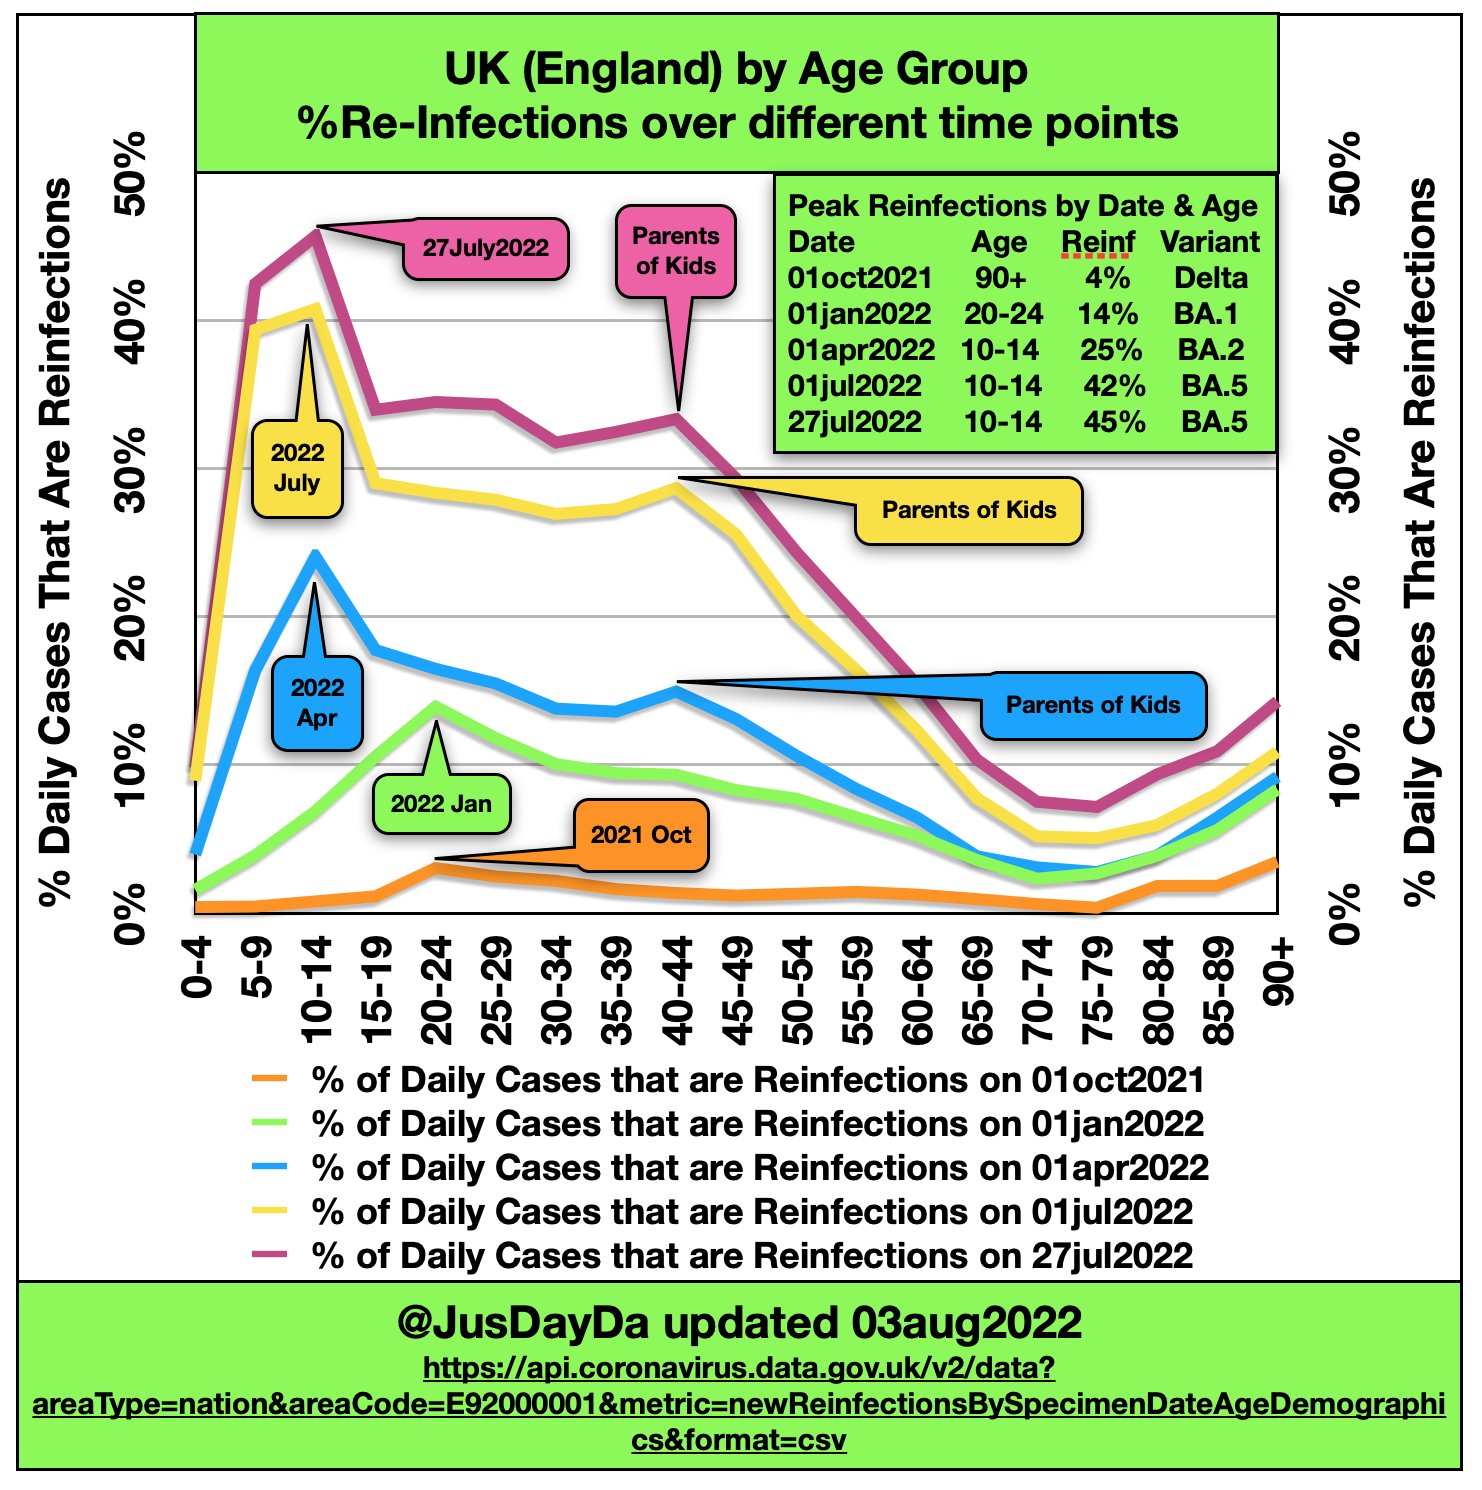 UK COVID-19 reinfections by age group